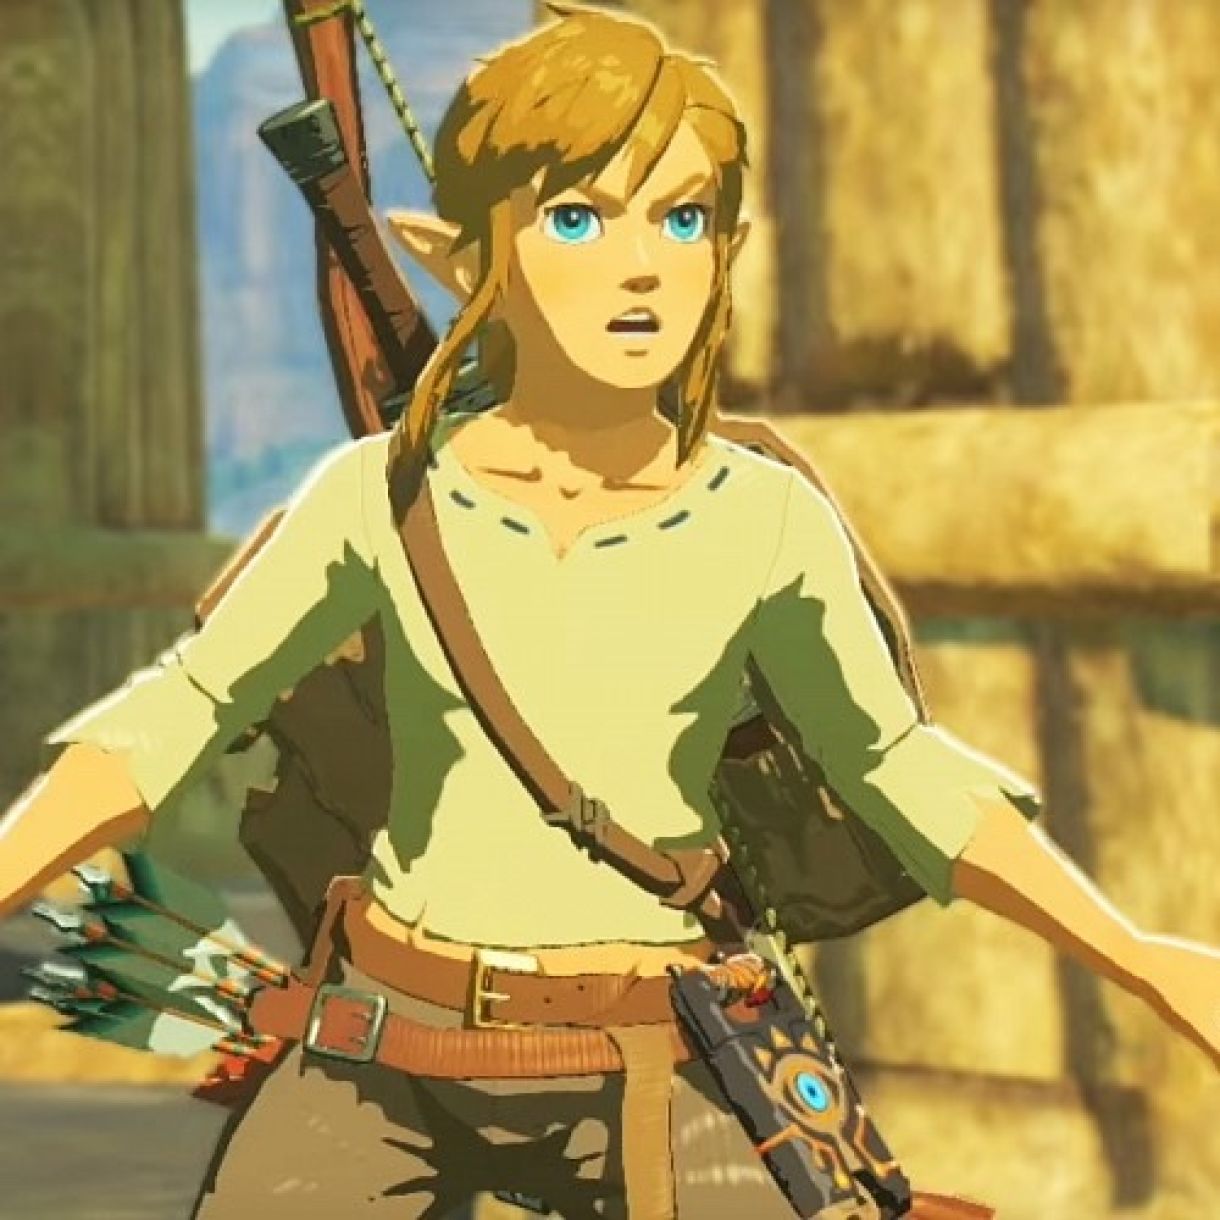 A Sequel to the Legend of Zelda: Breath of the Wild Revealed: VIDEO